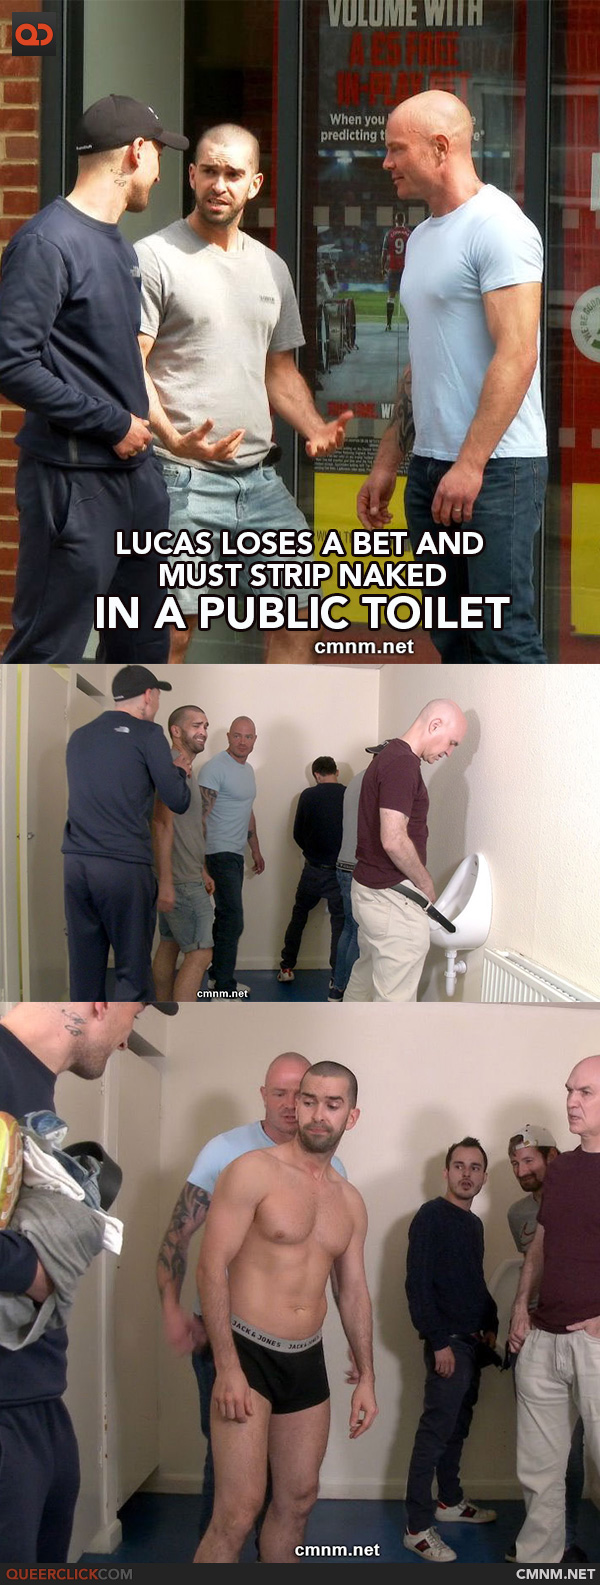 Lucas Loses a Bet and Must Strip Naked in a Public Toilet at CMNM.net